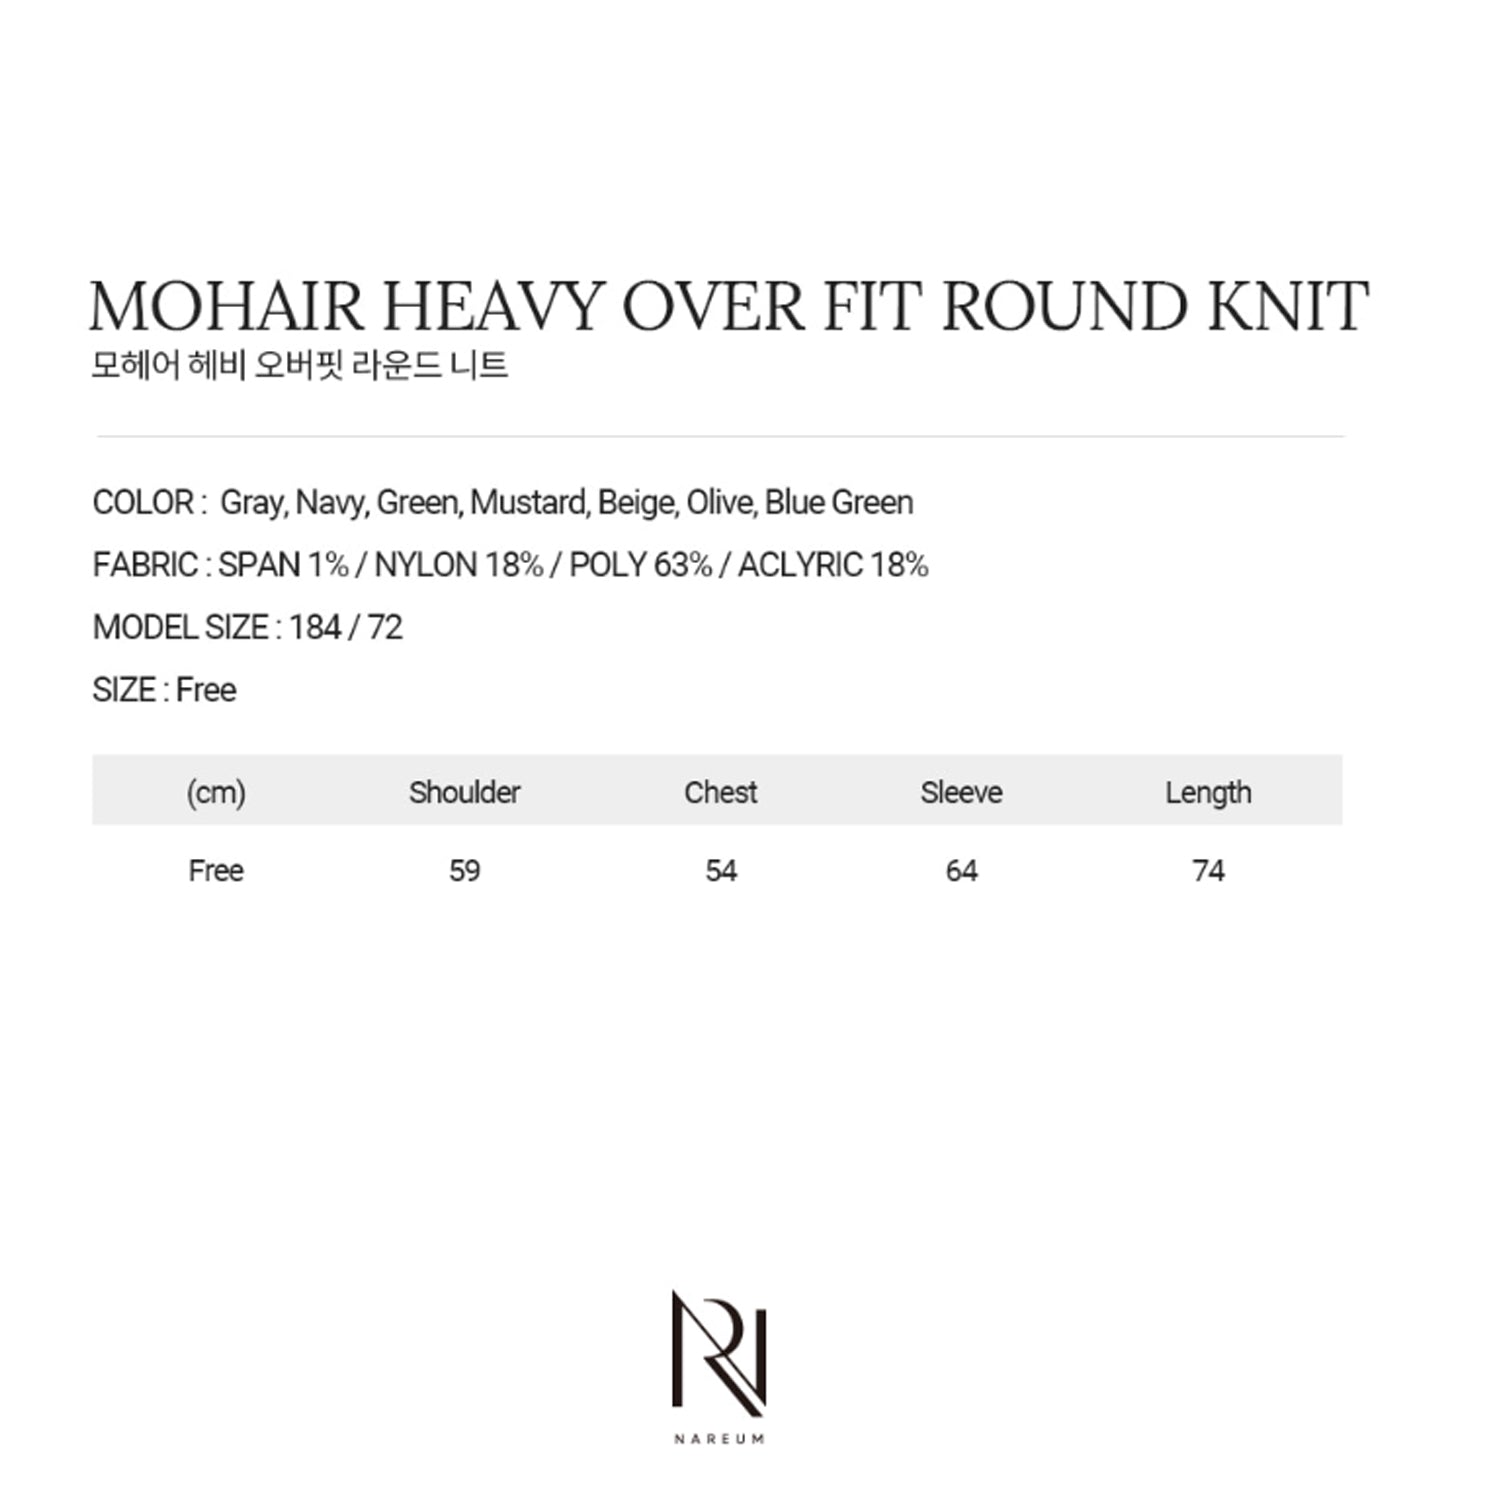 MOHAIR HEAVY OVERFIT ROUND KNIT